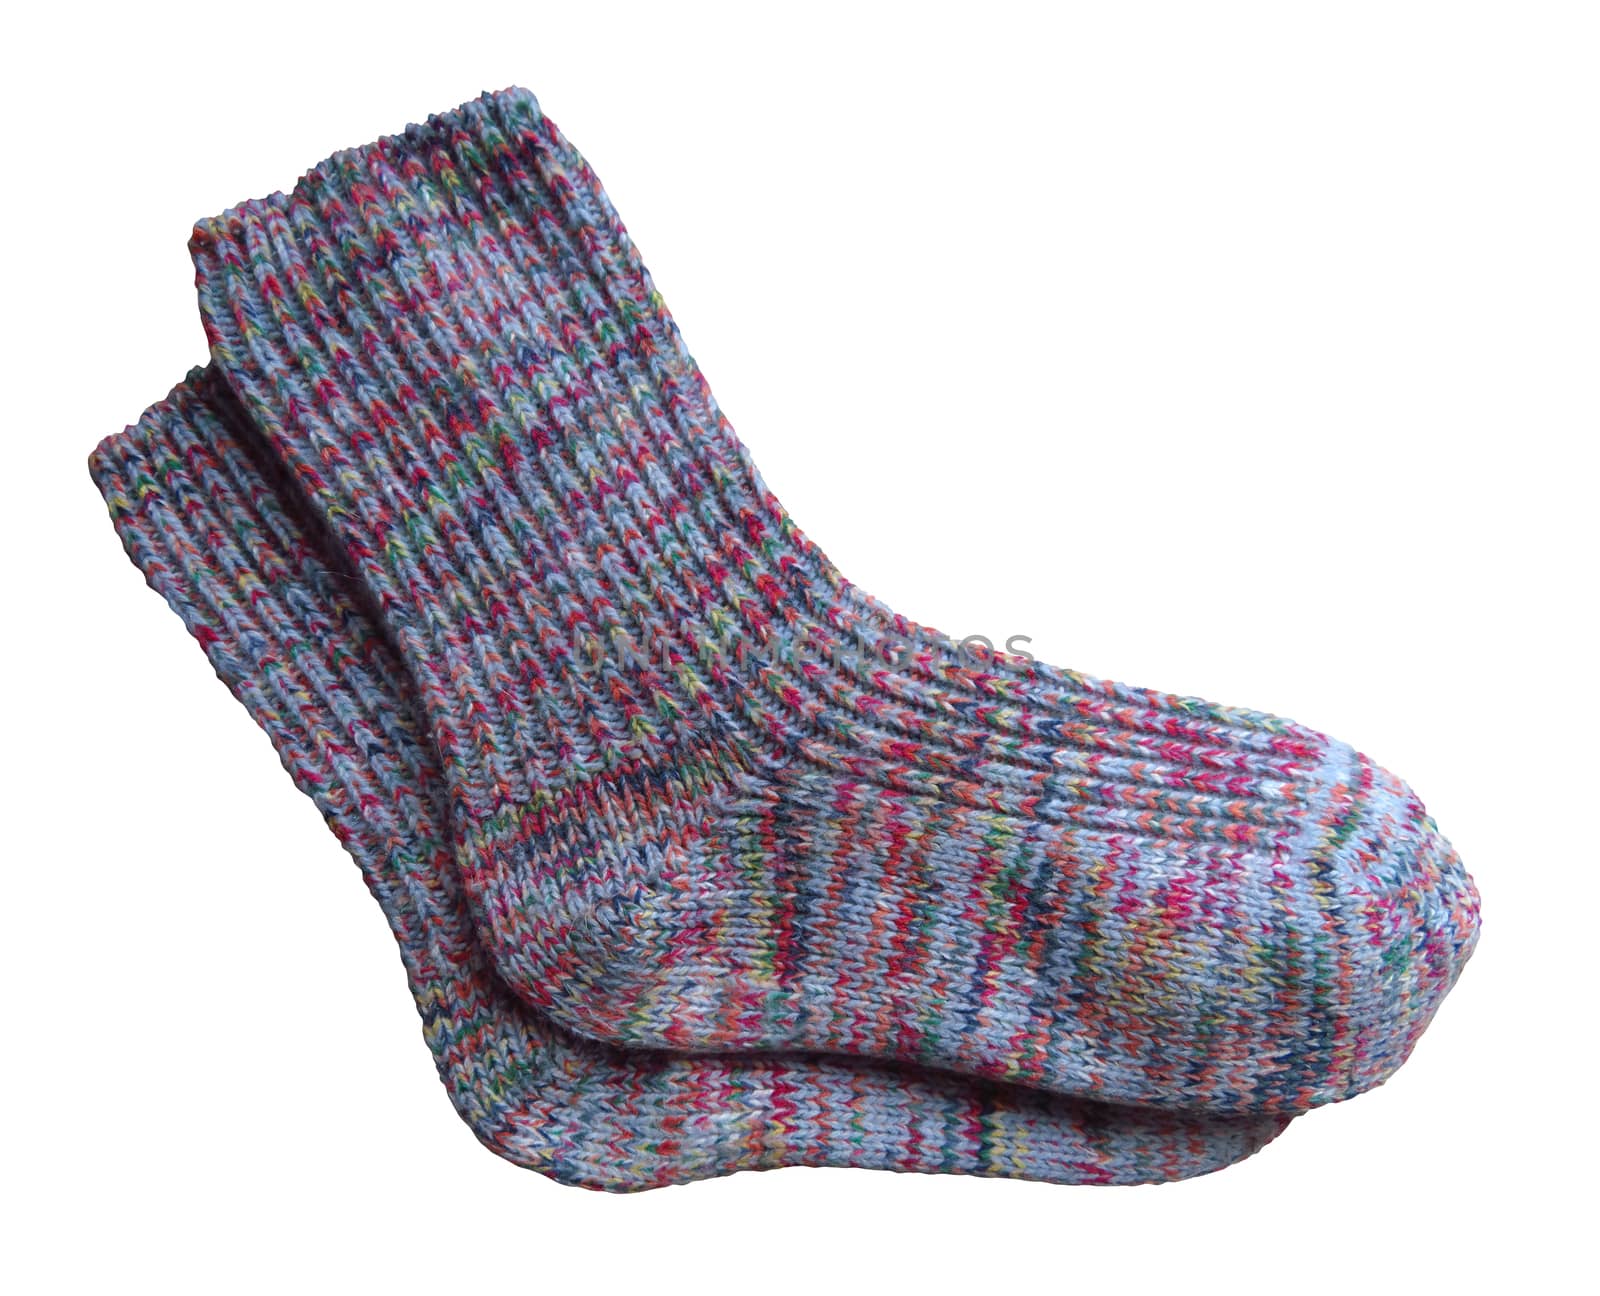 Pair of woolen socks isolated on white background. Clipping Path included.